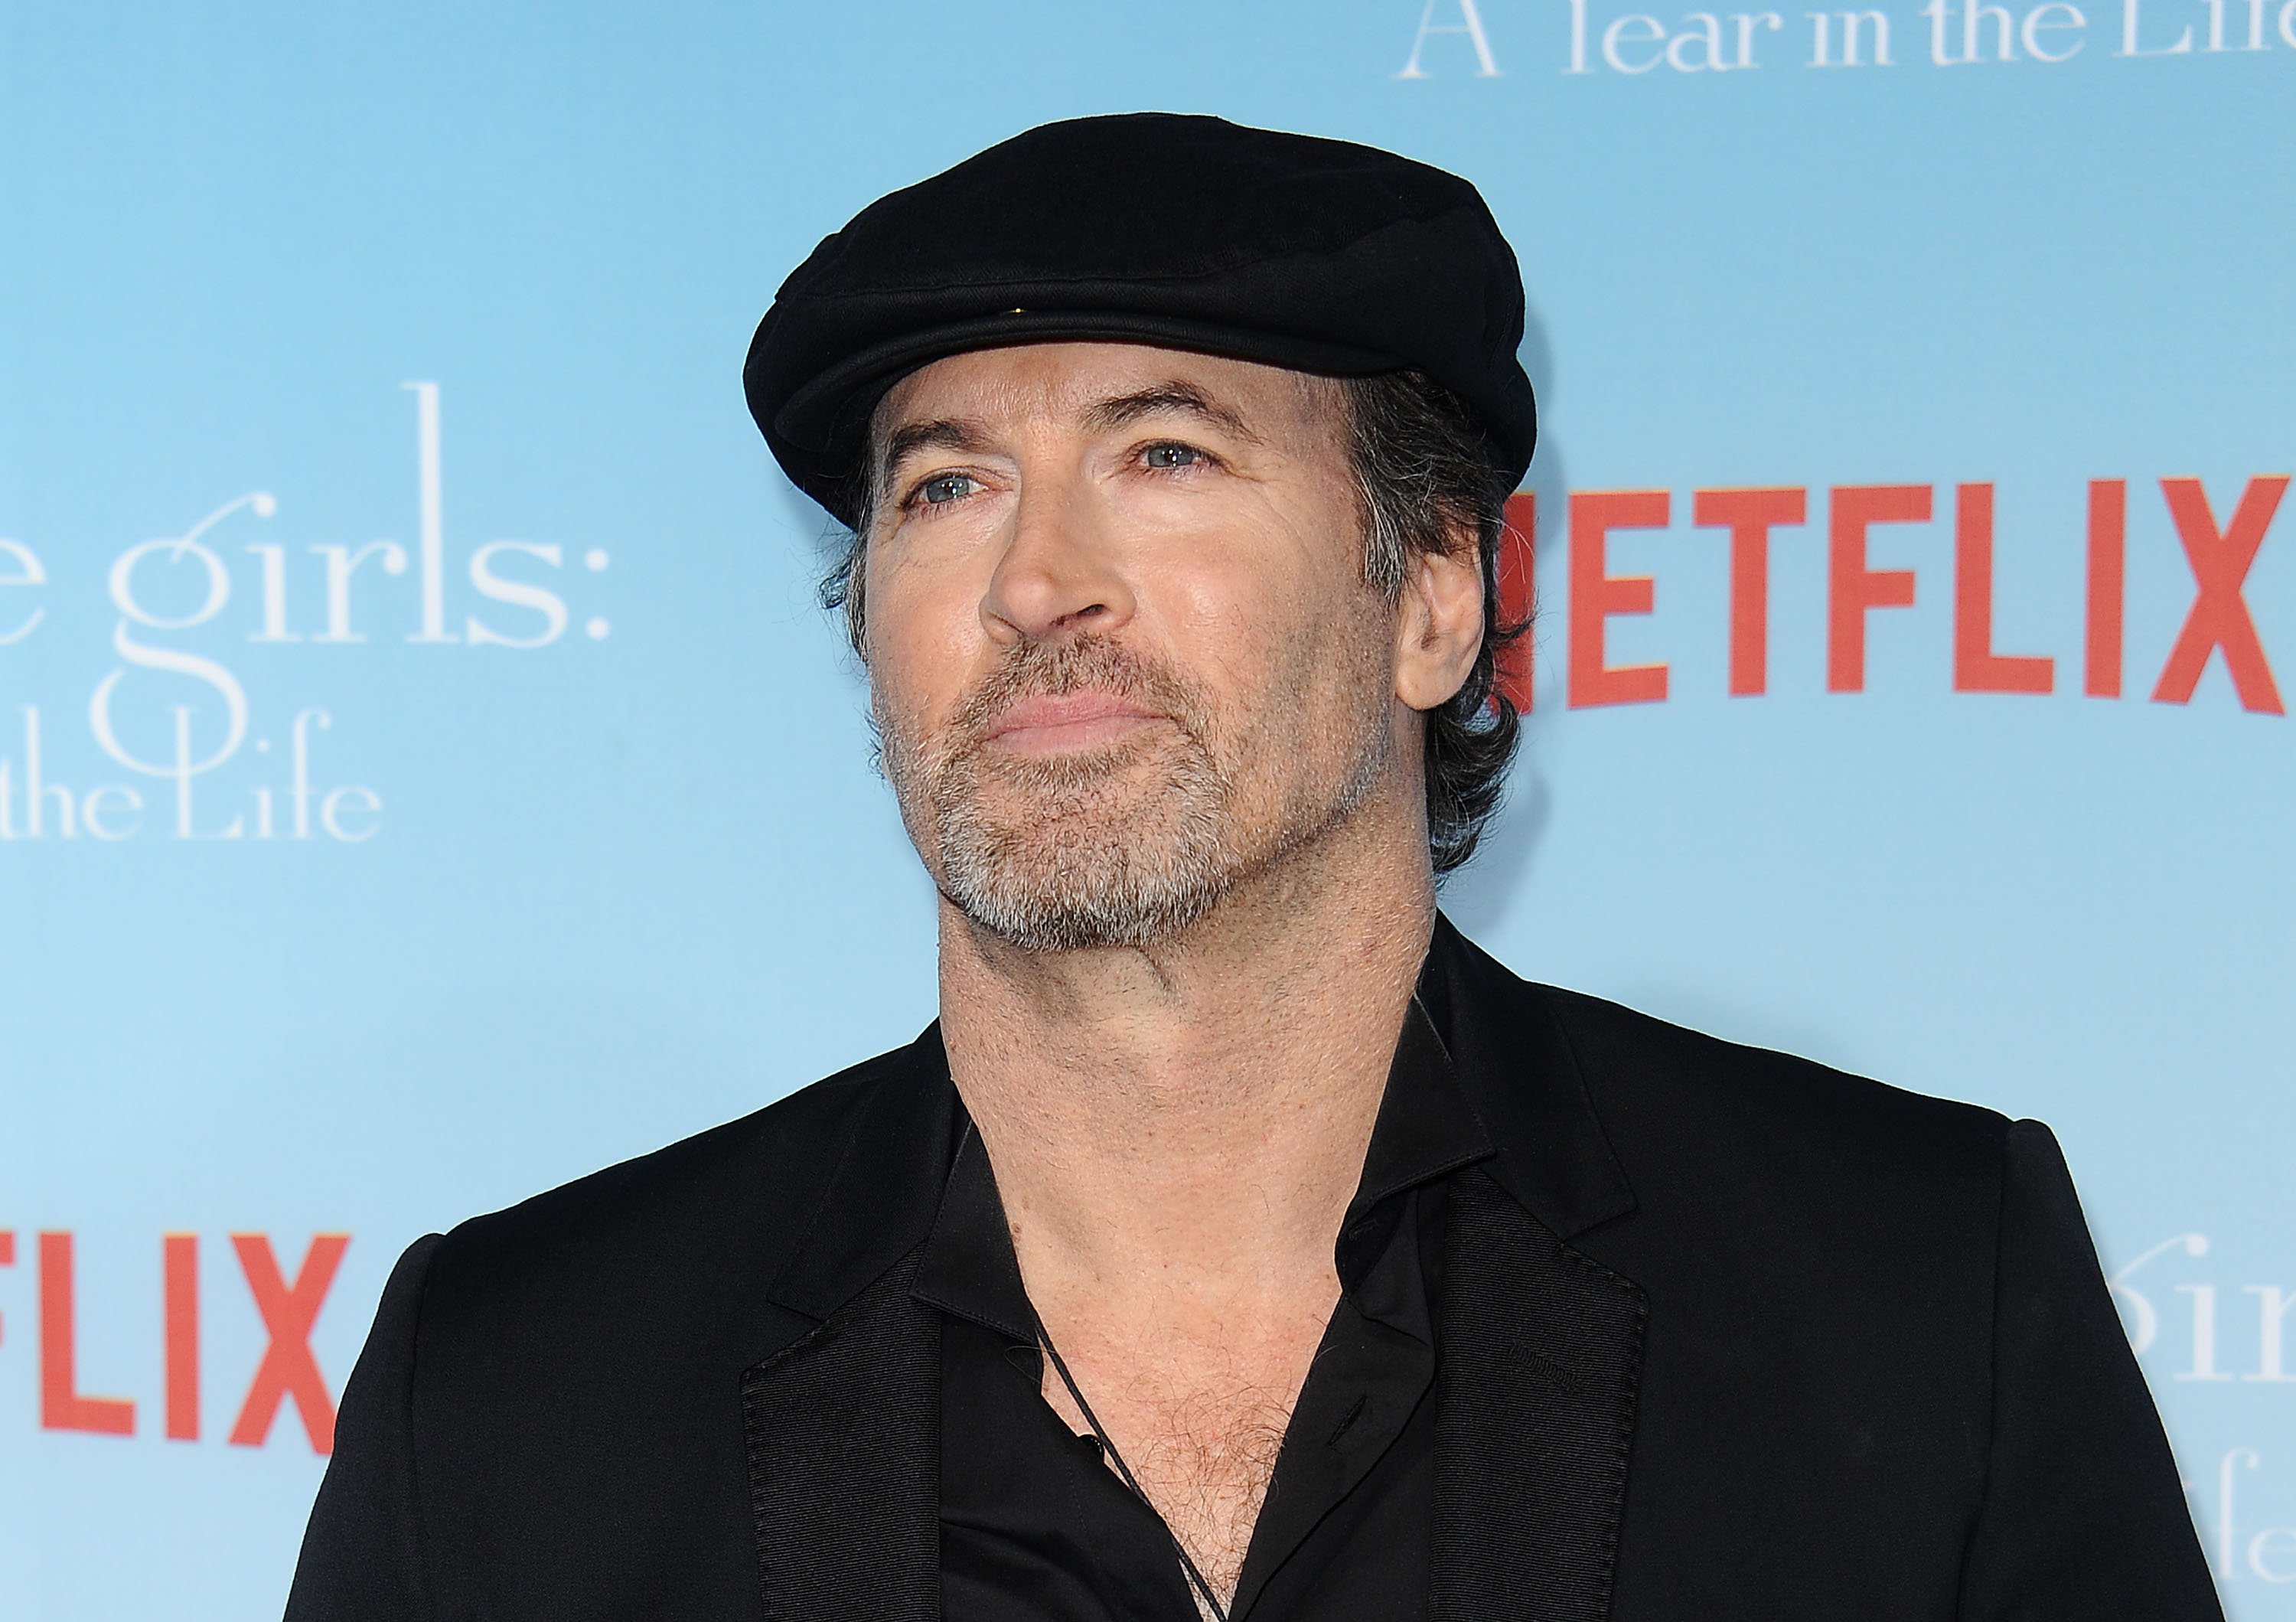 Scott Patterson attends the premiere of 'Gilmore Girls: A Year in the Life' at Regency Bruin Theatre